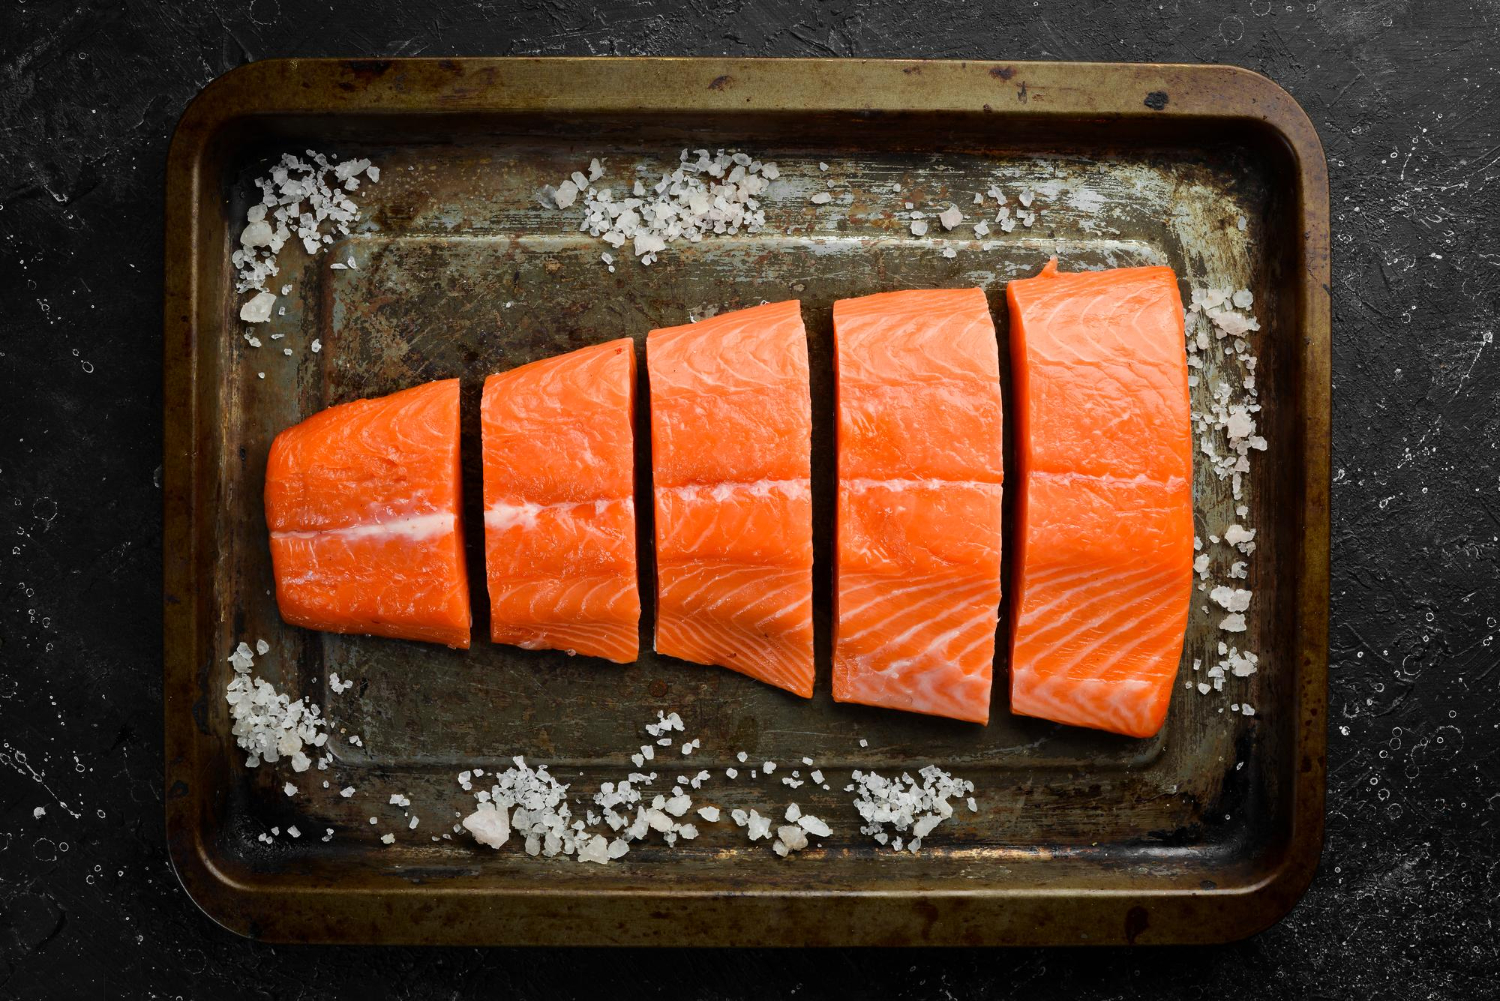 pieces-salmon-fillet-with-spices-metal-baking-dish-seafood-top-view-free-space-text